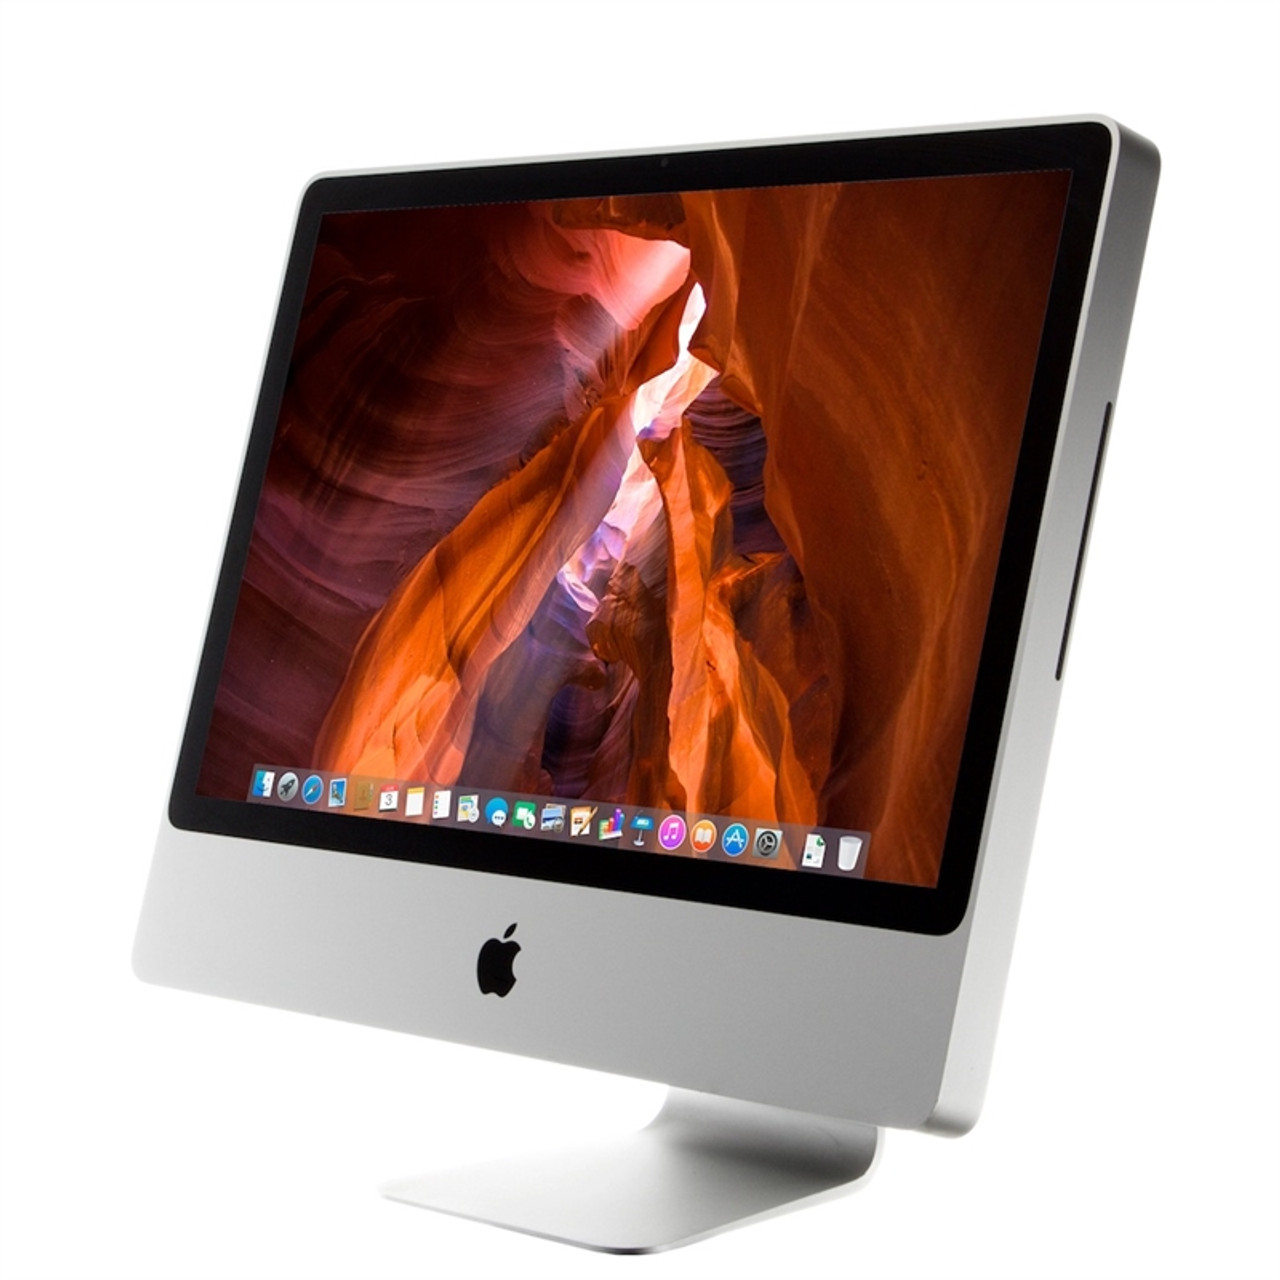 Vintage: Apple iMac 24-inch 2.8GHz Core 2 Duo (Early 2008) MB325LL/A -  Excellent Condition